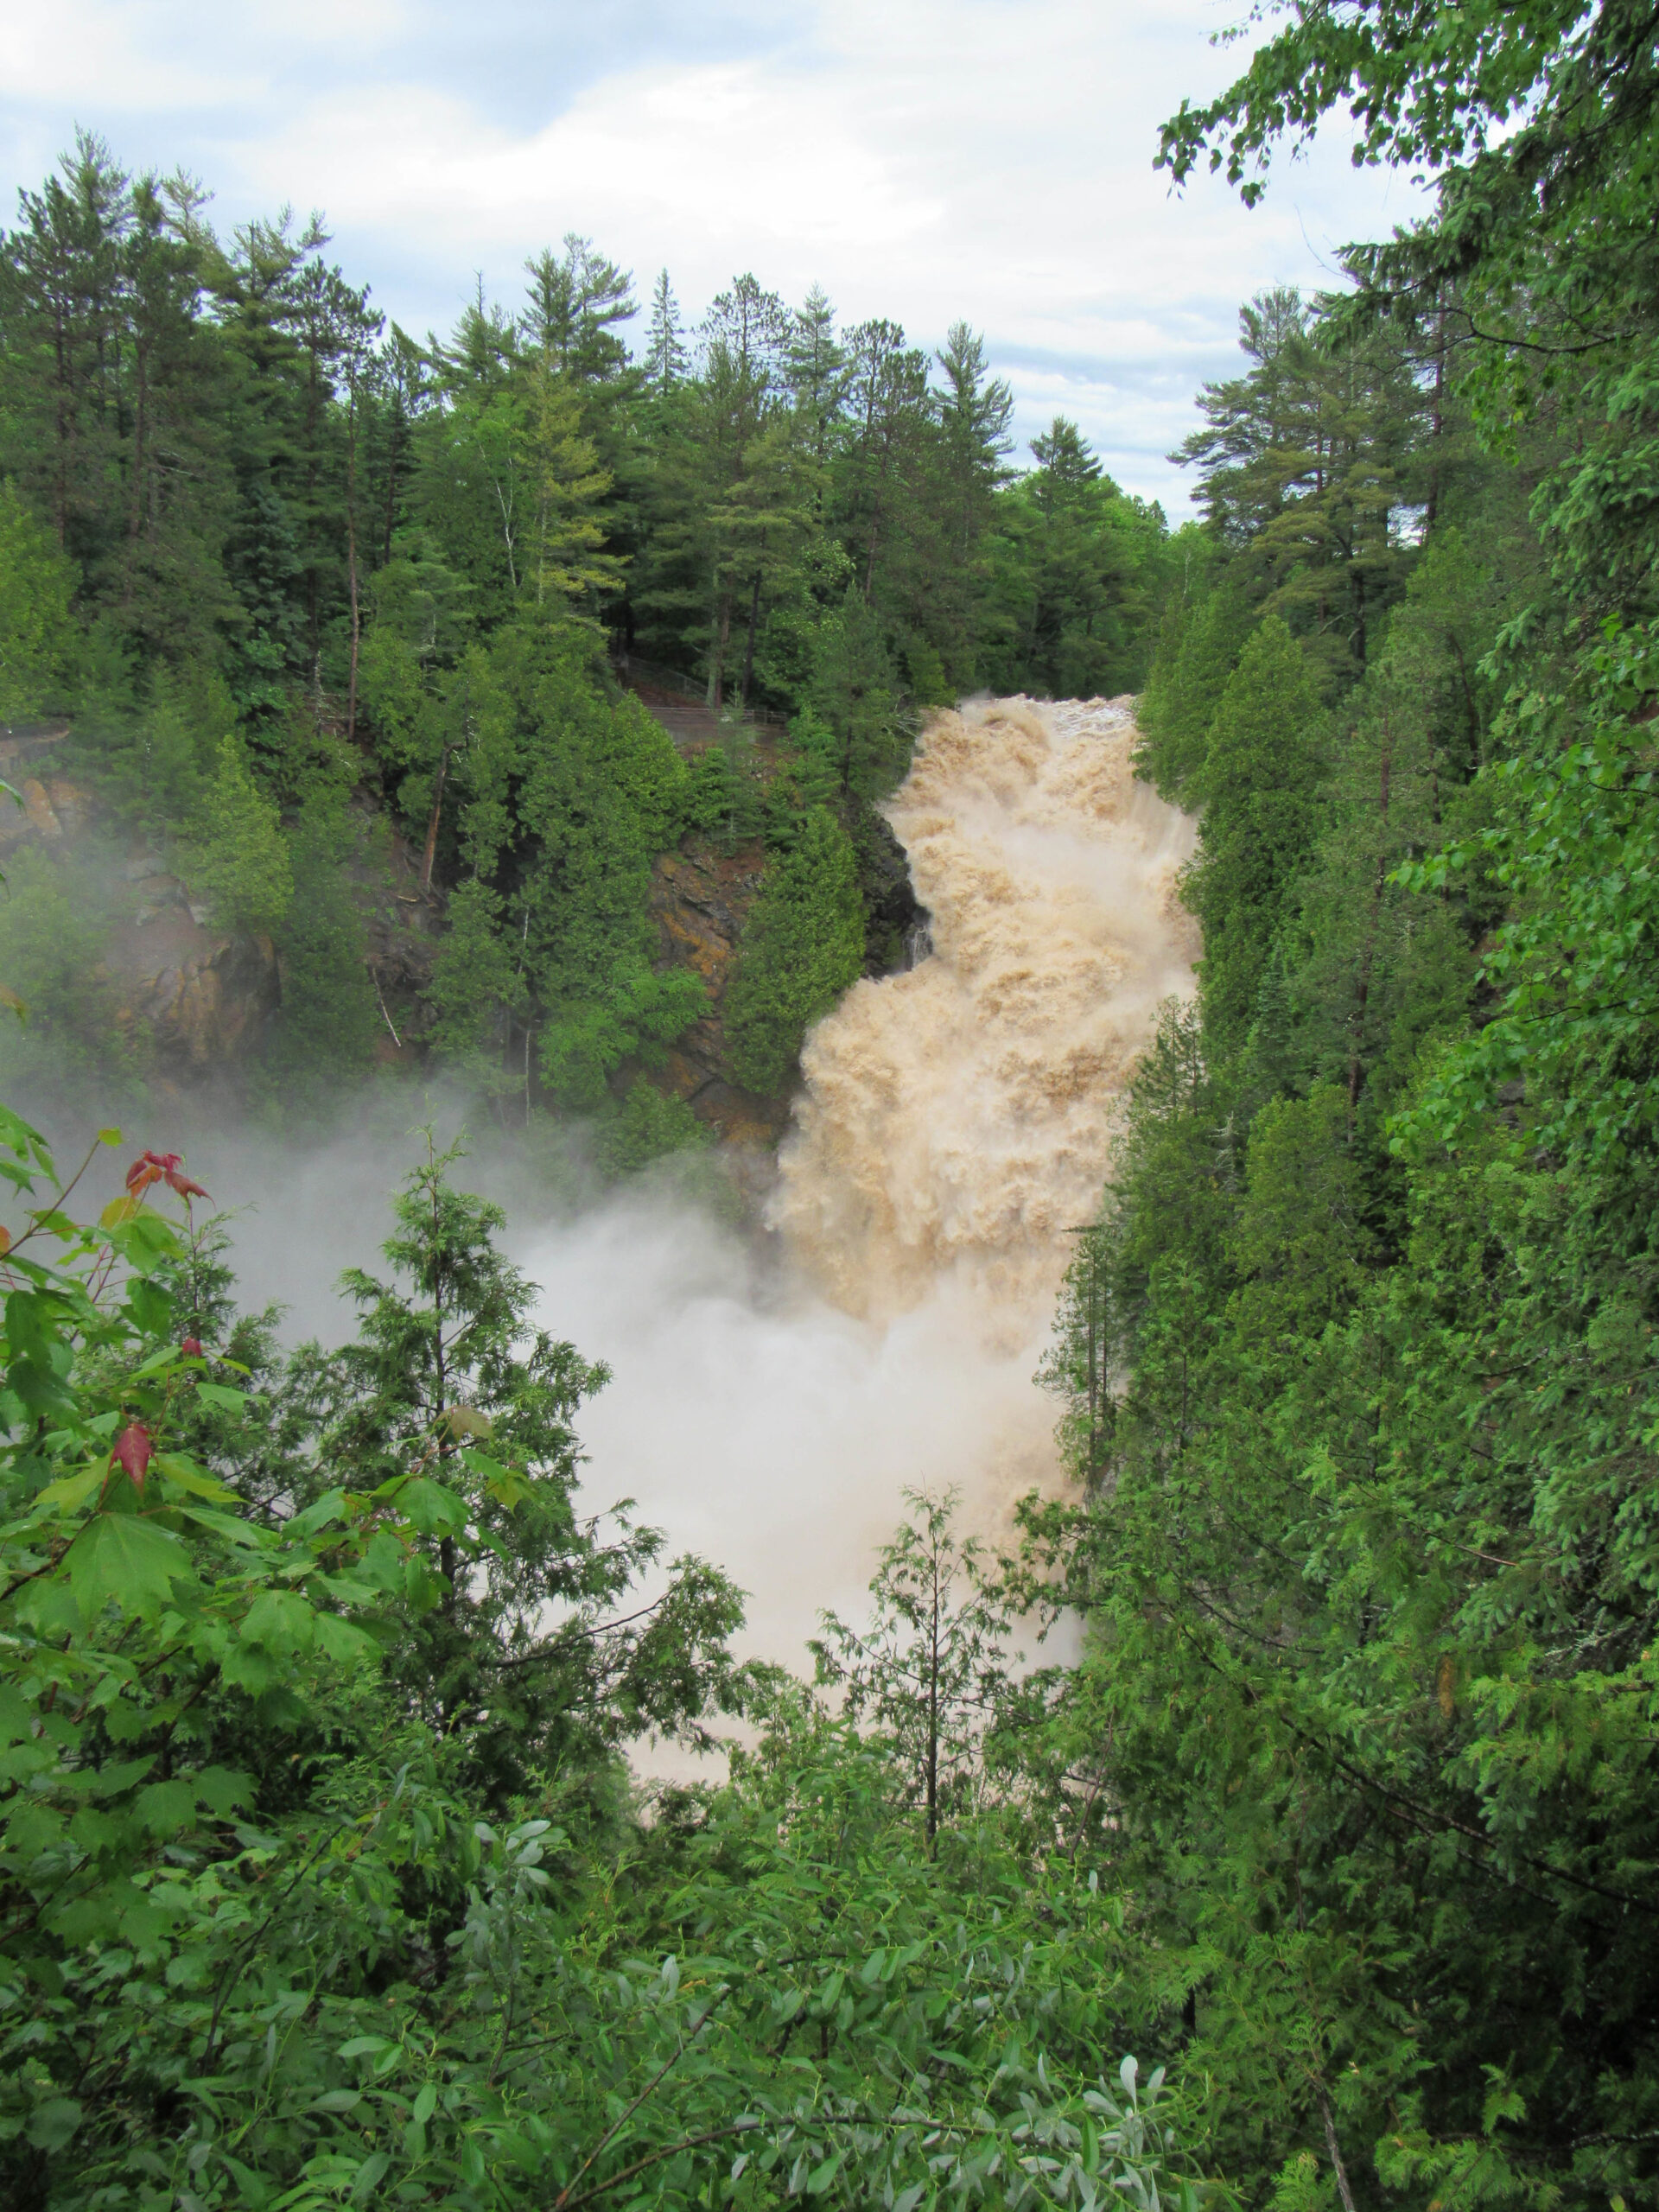 Big Manitou Falls at Pattison State Park in Douglas County